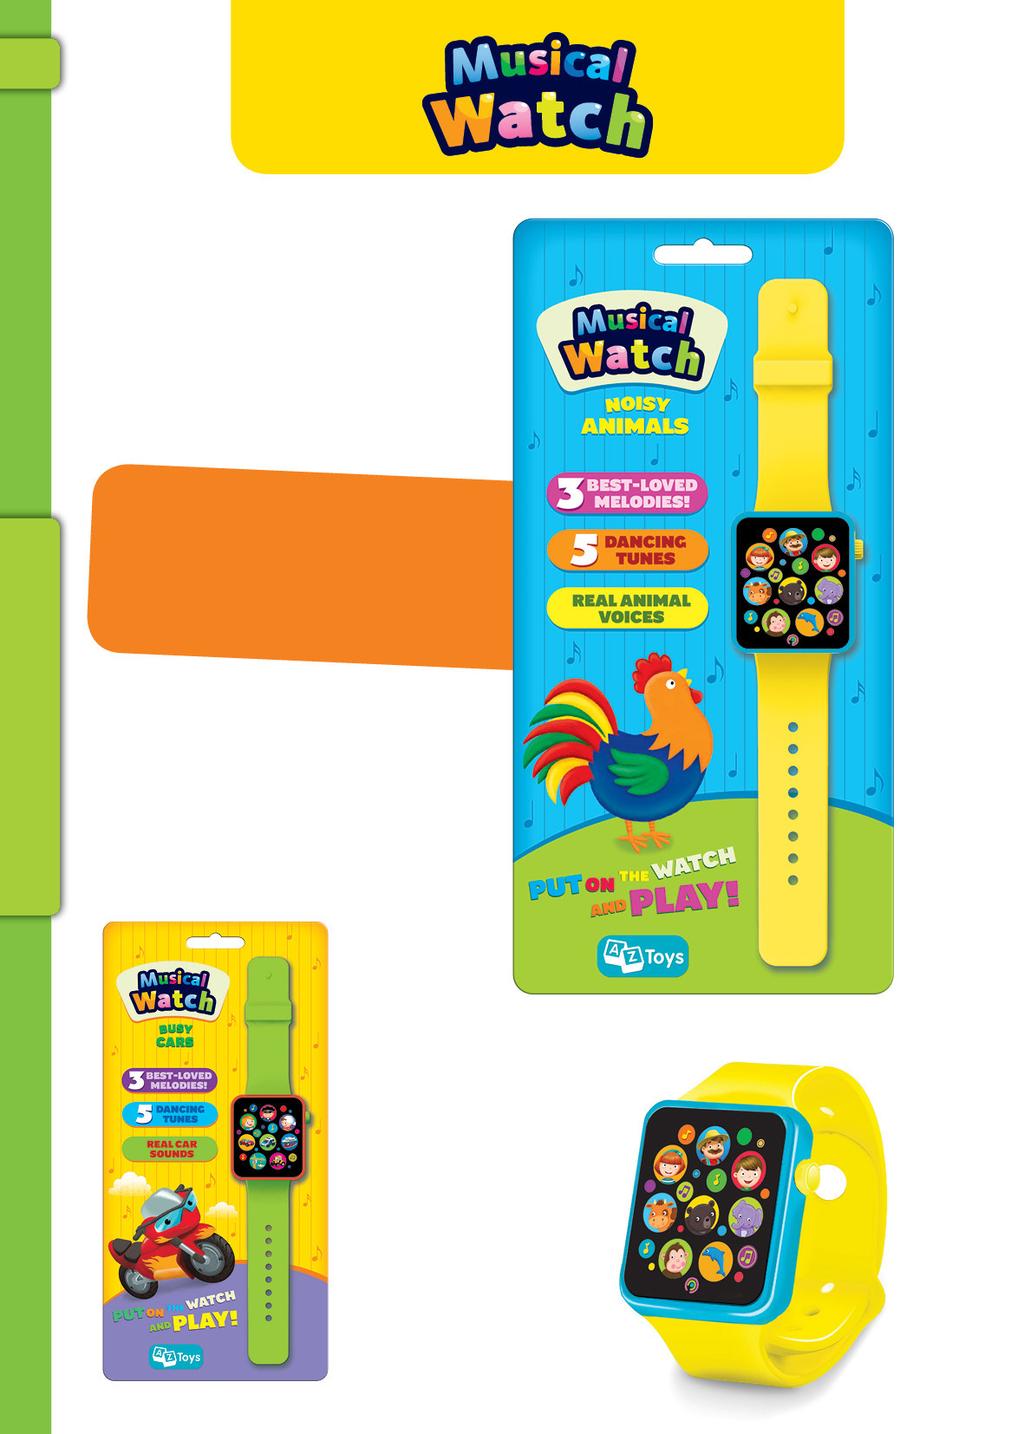 28 NOISY ANIMALS REF. AZT-15-A-001 3 best-loved melodies 5 dancing tunes Real animal voices SMART WATCHES Super new toy Musical Watch is a real gift for any child!